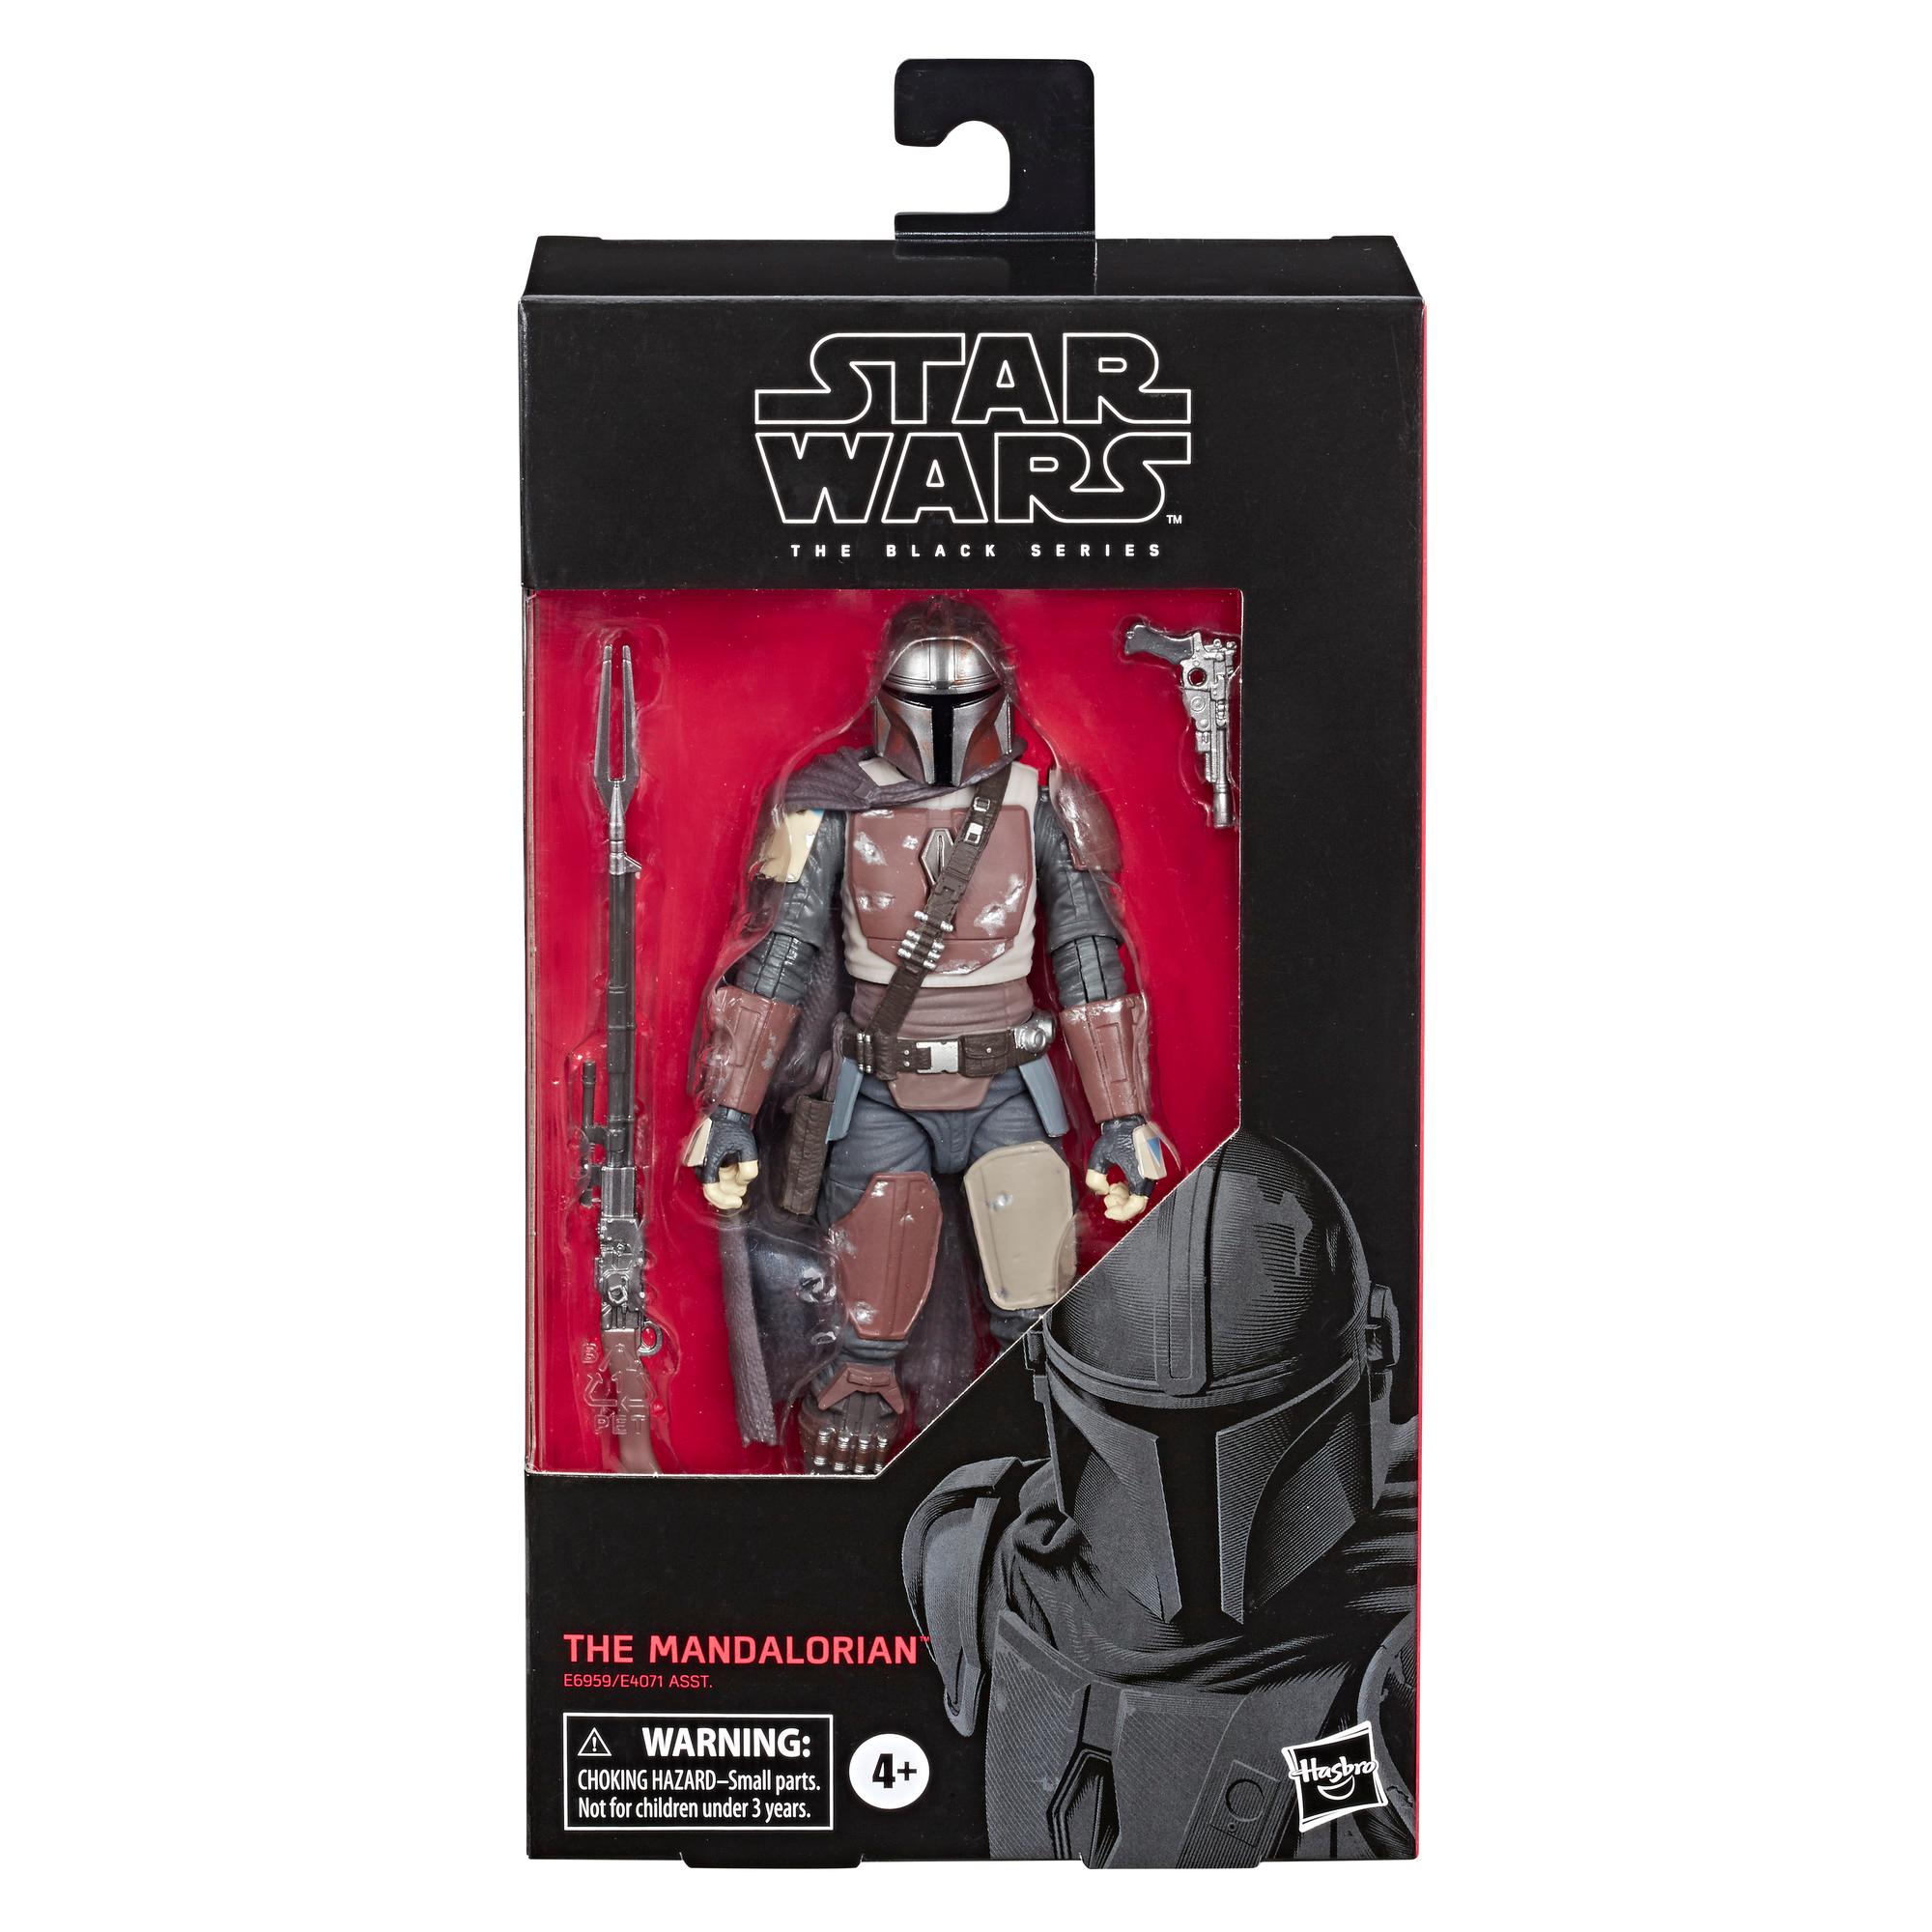 Star Wars The Black Series The Mandalorian Toy 6 Inch Scale Collectible Action 4 